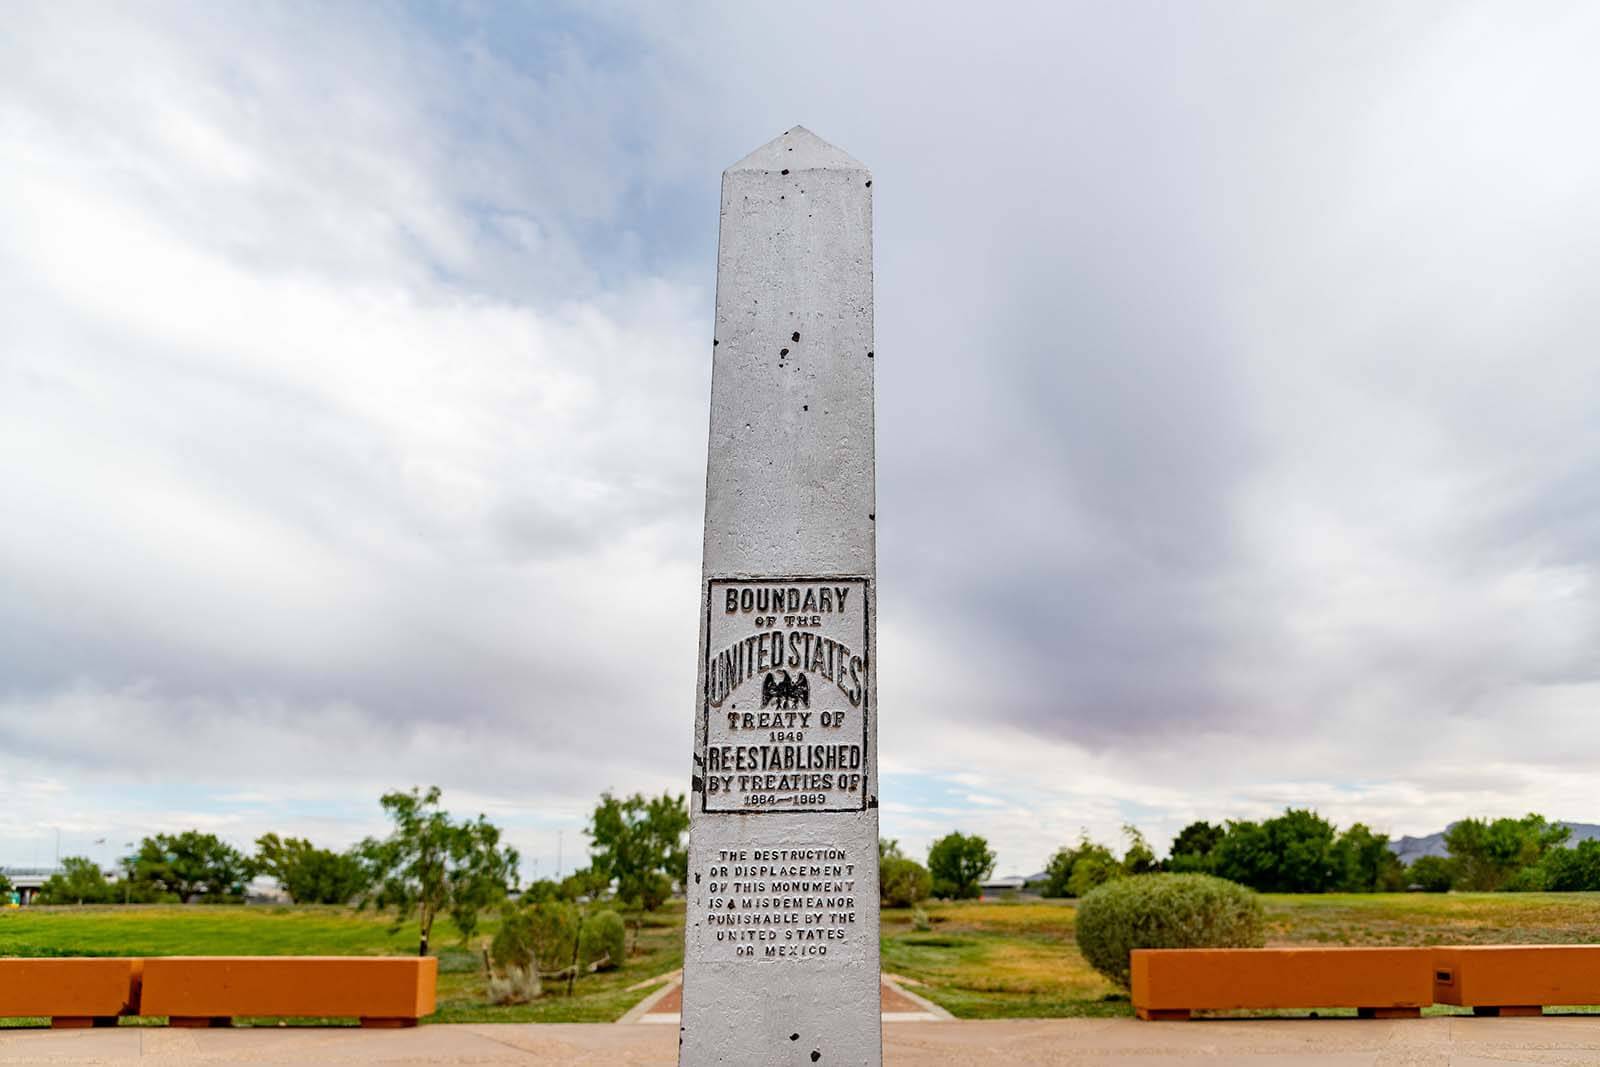 An obelisk reads 'Boundary of the United States. Treaty of 1849. Re-established by treaties of 1864-1889.'